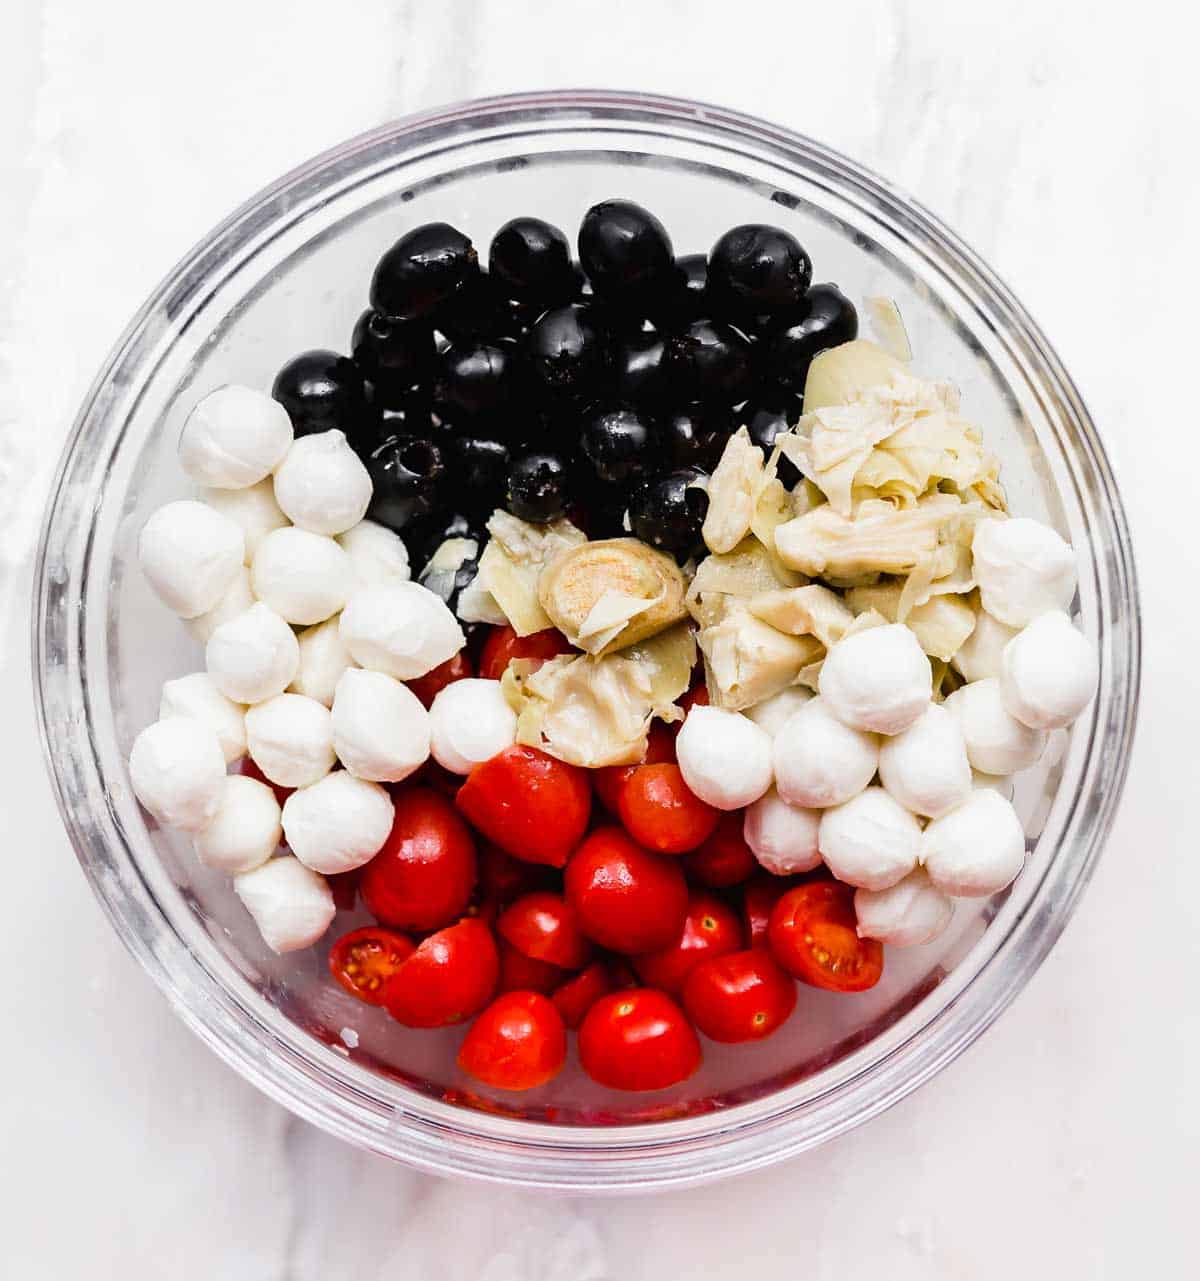 A glass bowl filled with mozzarella pearls, tomatoes, olives, and artichokes.